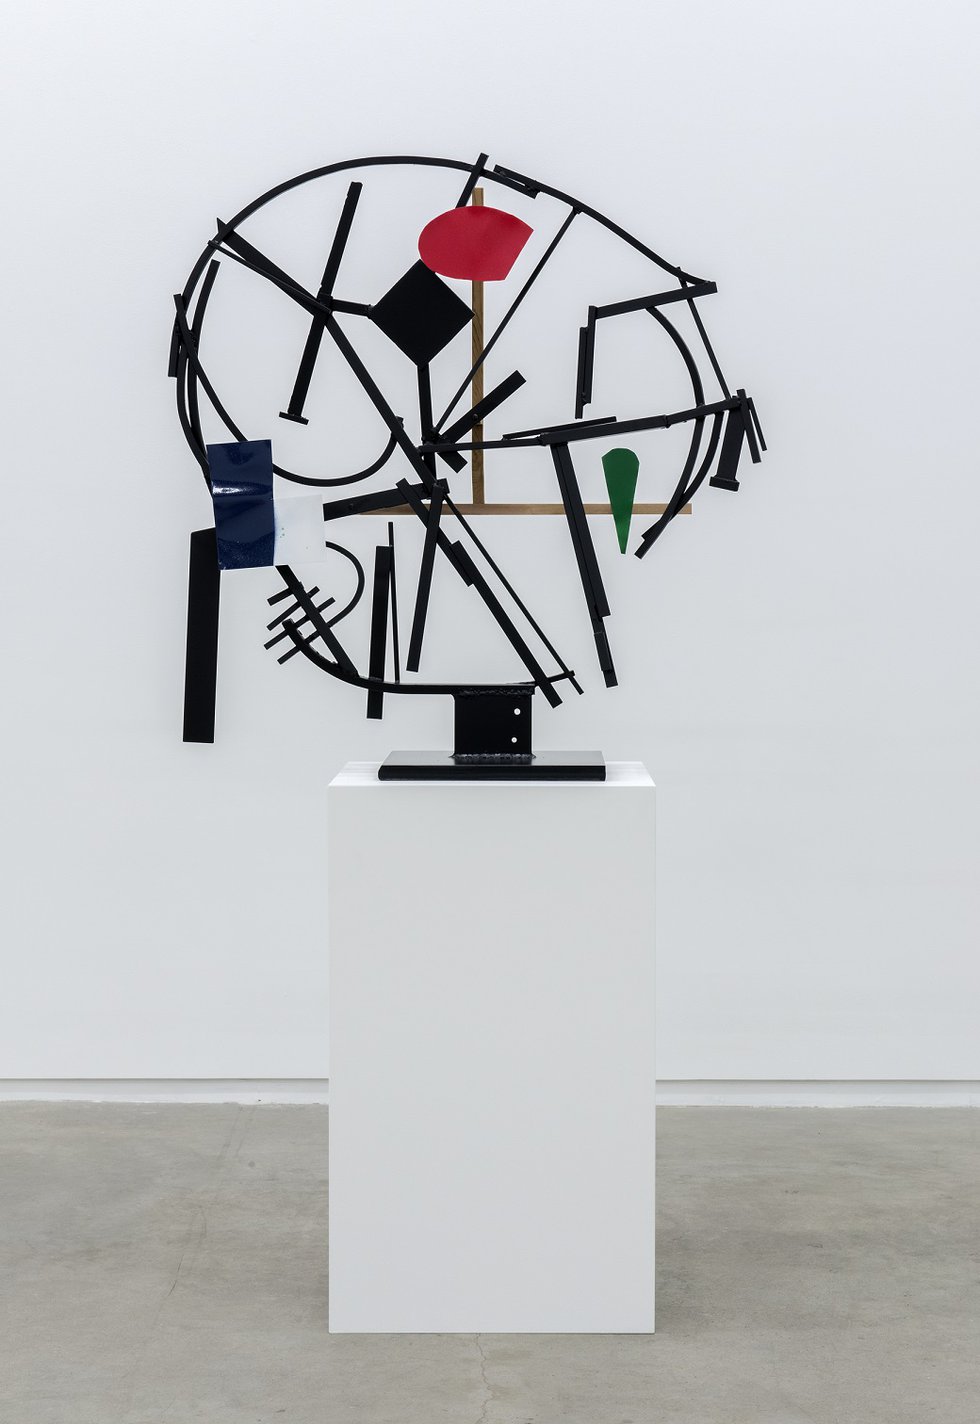 Damian Moppett, "Timeless Clock Abstraction," 2013